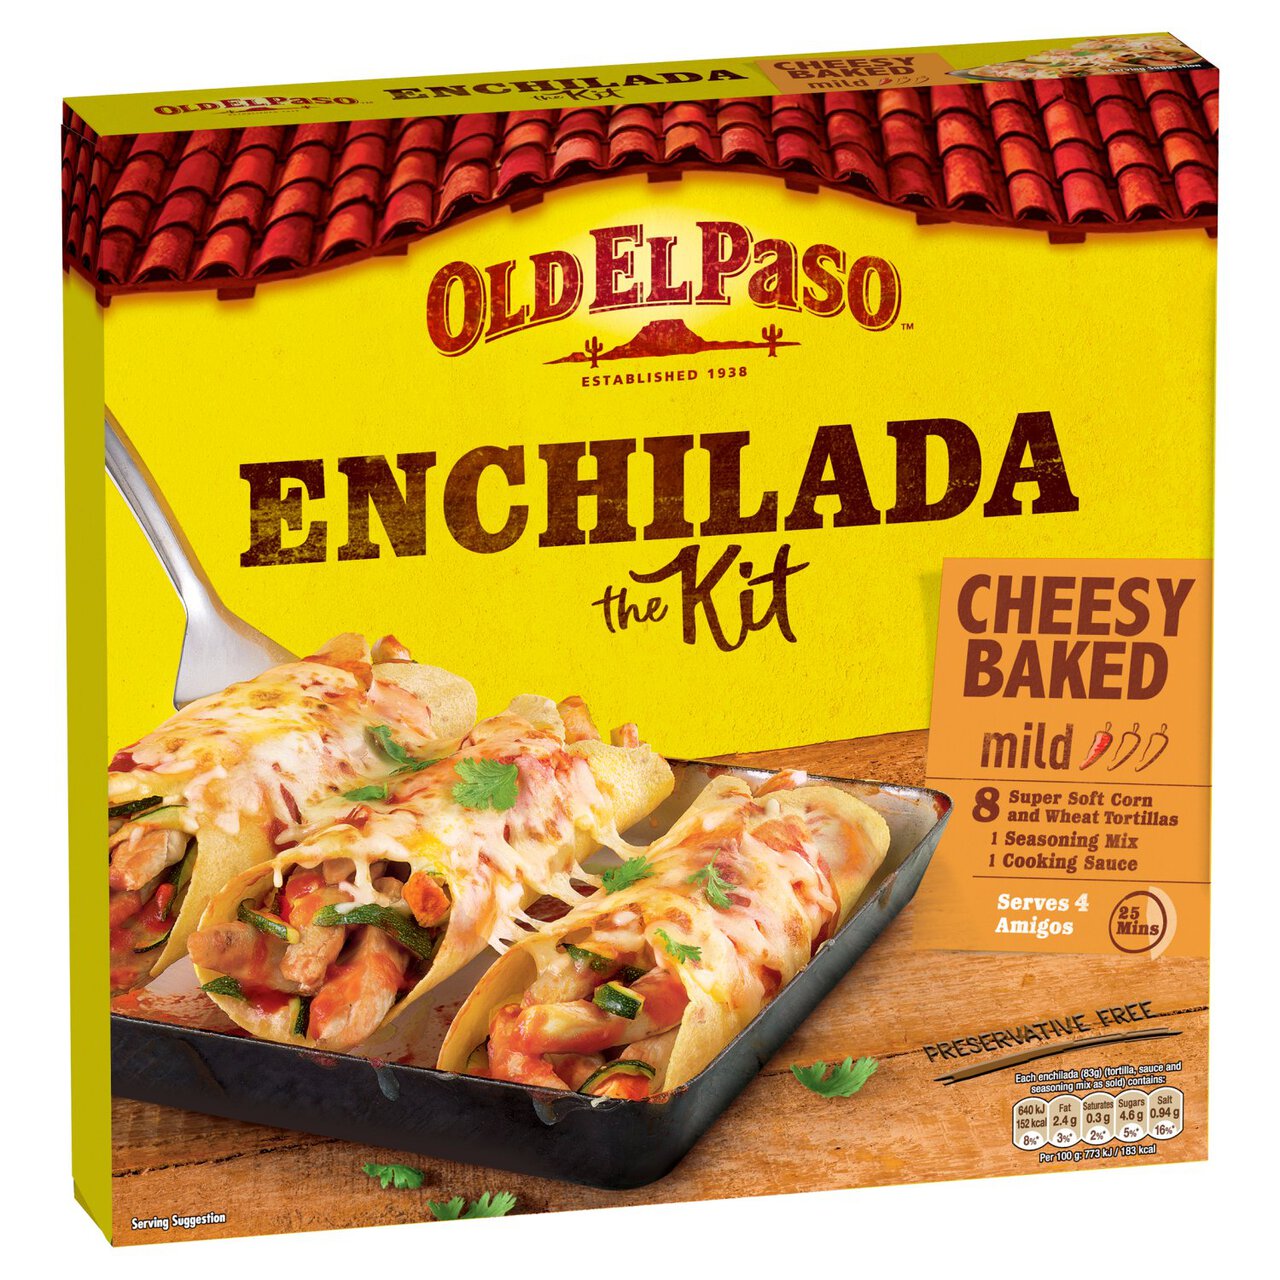 Old El Paso Mexican Cheesy Baked Enchilada Kit 663g